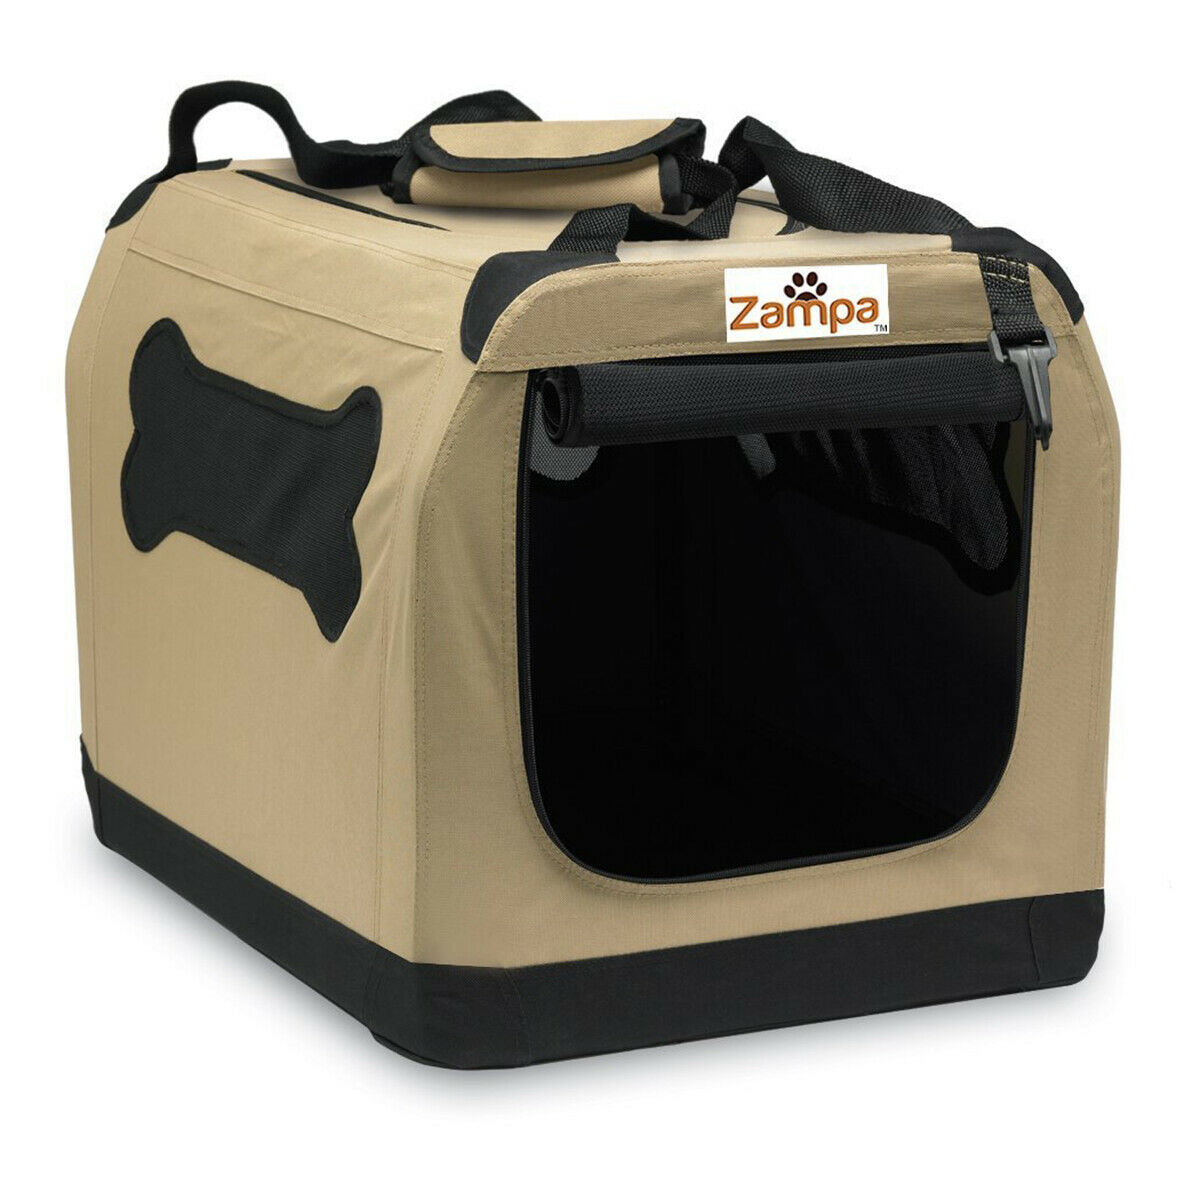 Zampa Pet Portable Crate Great for Travel Home and Outdoor